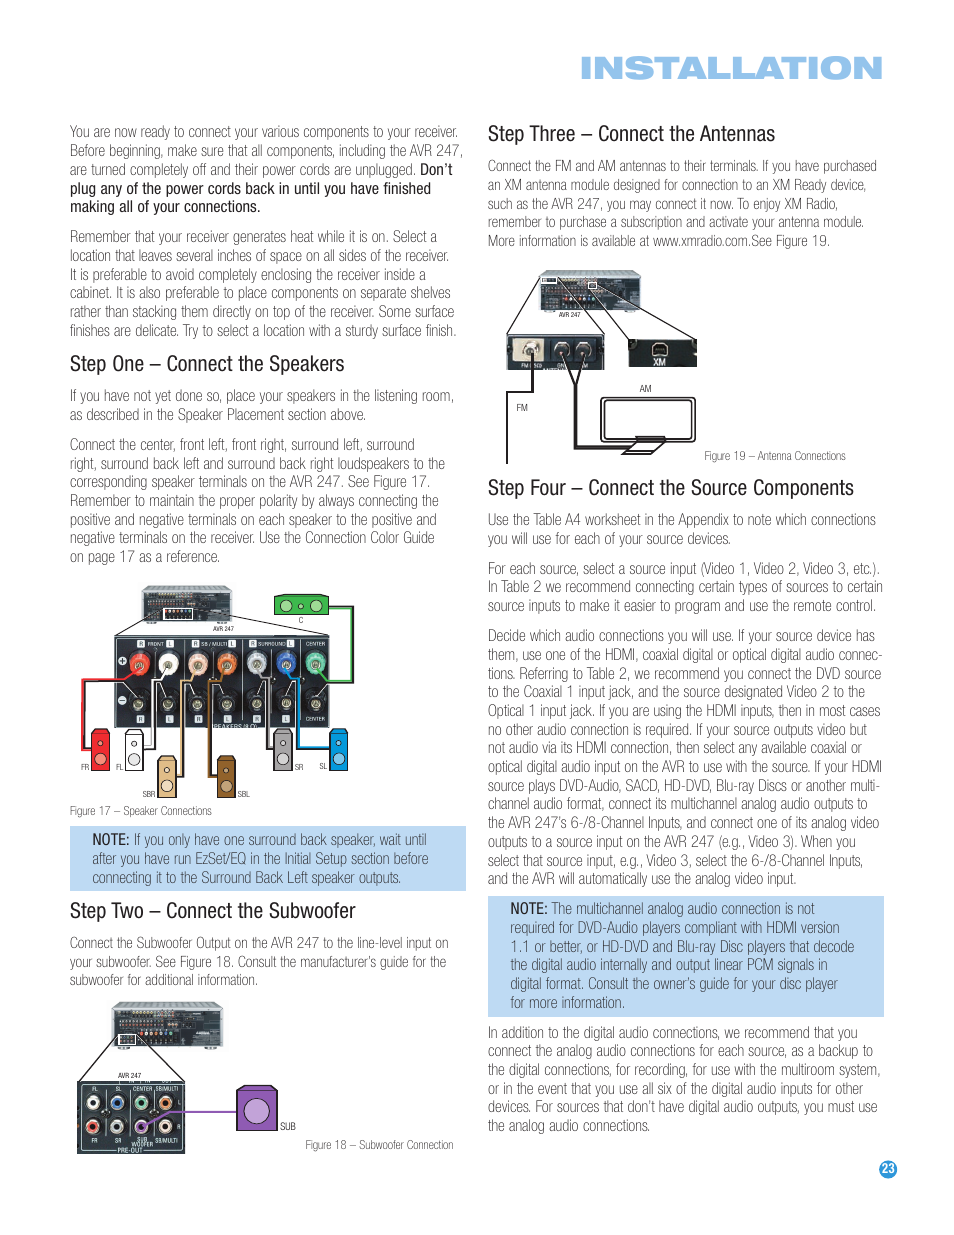 Installation, Step one – connect the speakers, Step two – connect the  subwoofer | Harman-Kardon AVR 247 User Manual | Page 23 / 76 | Original mode